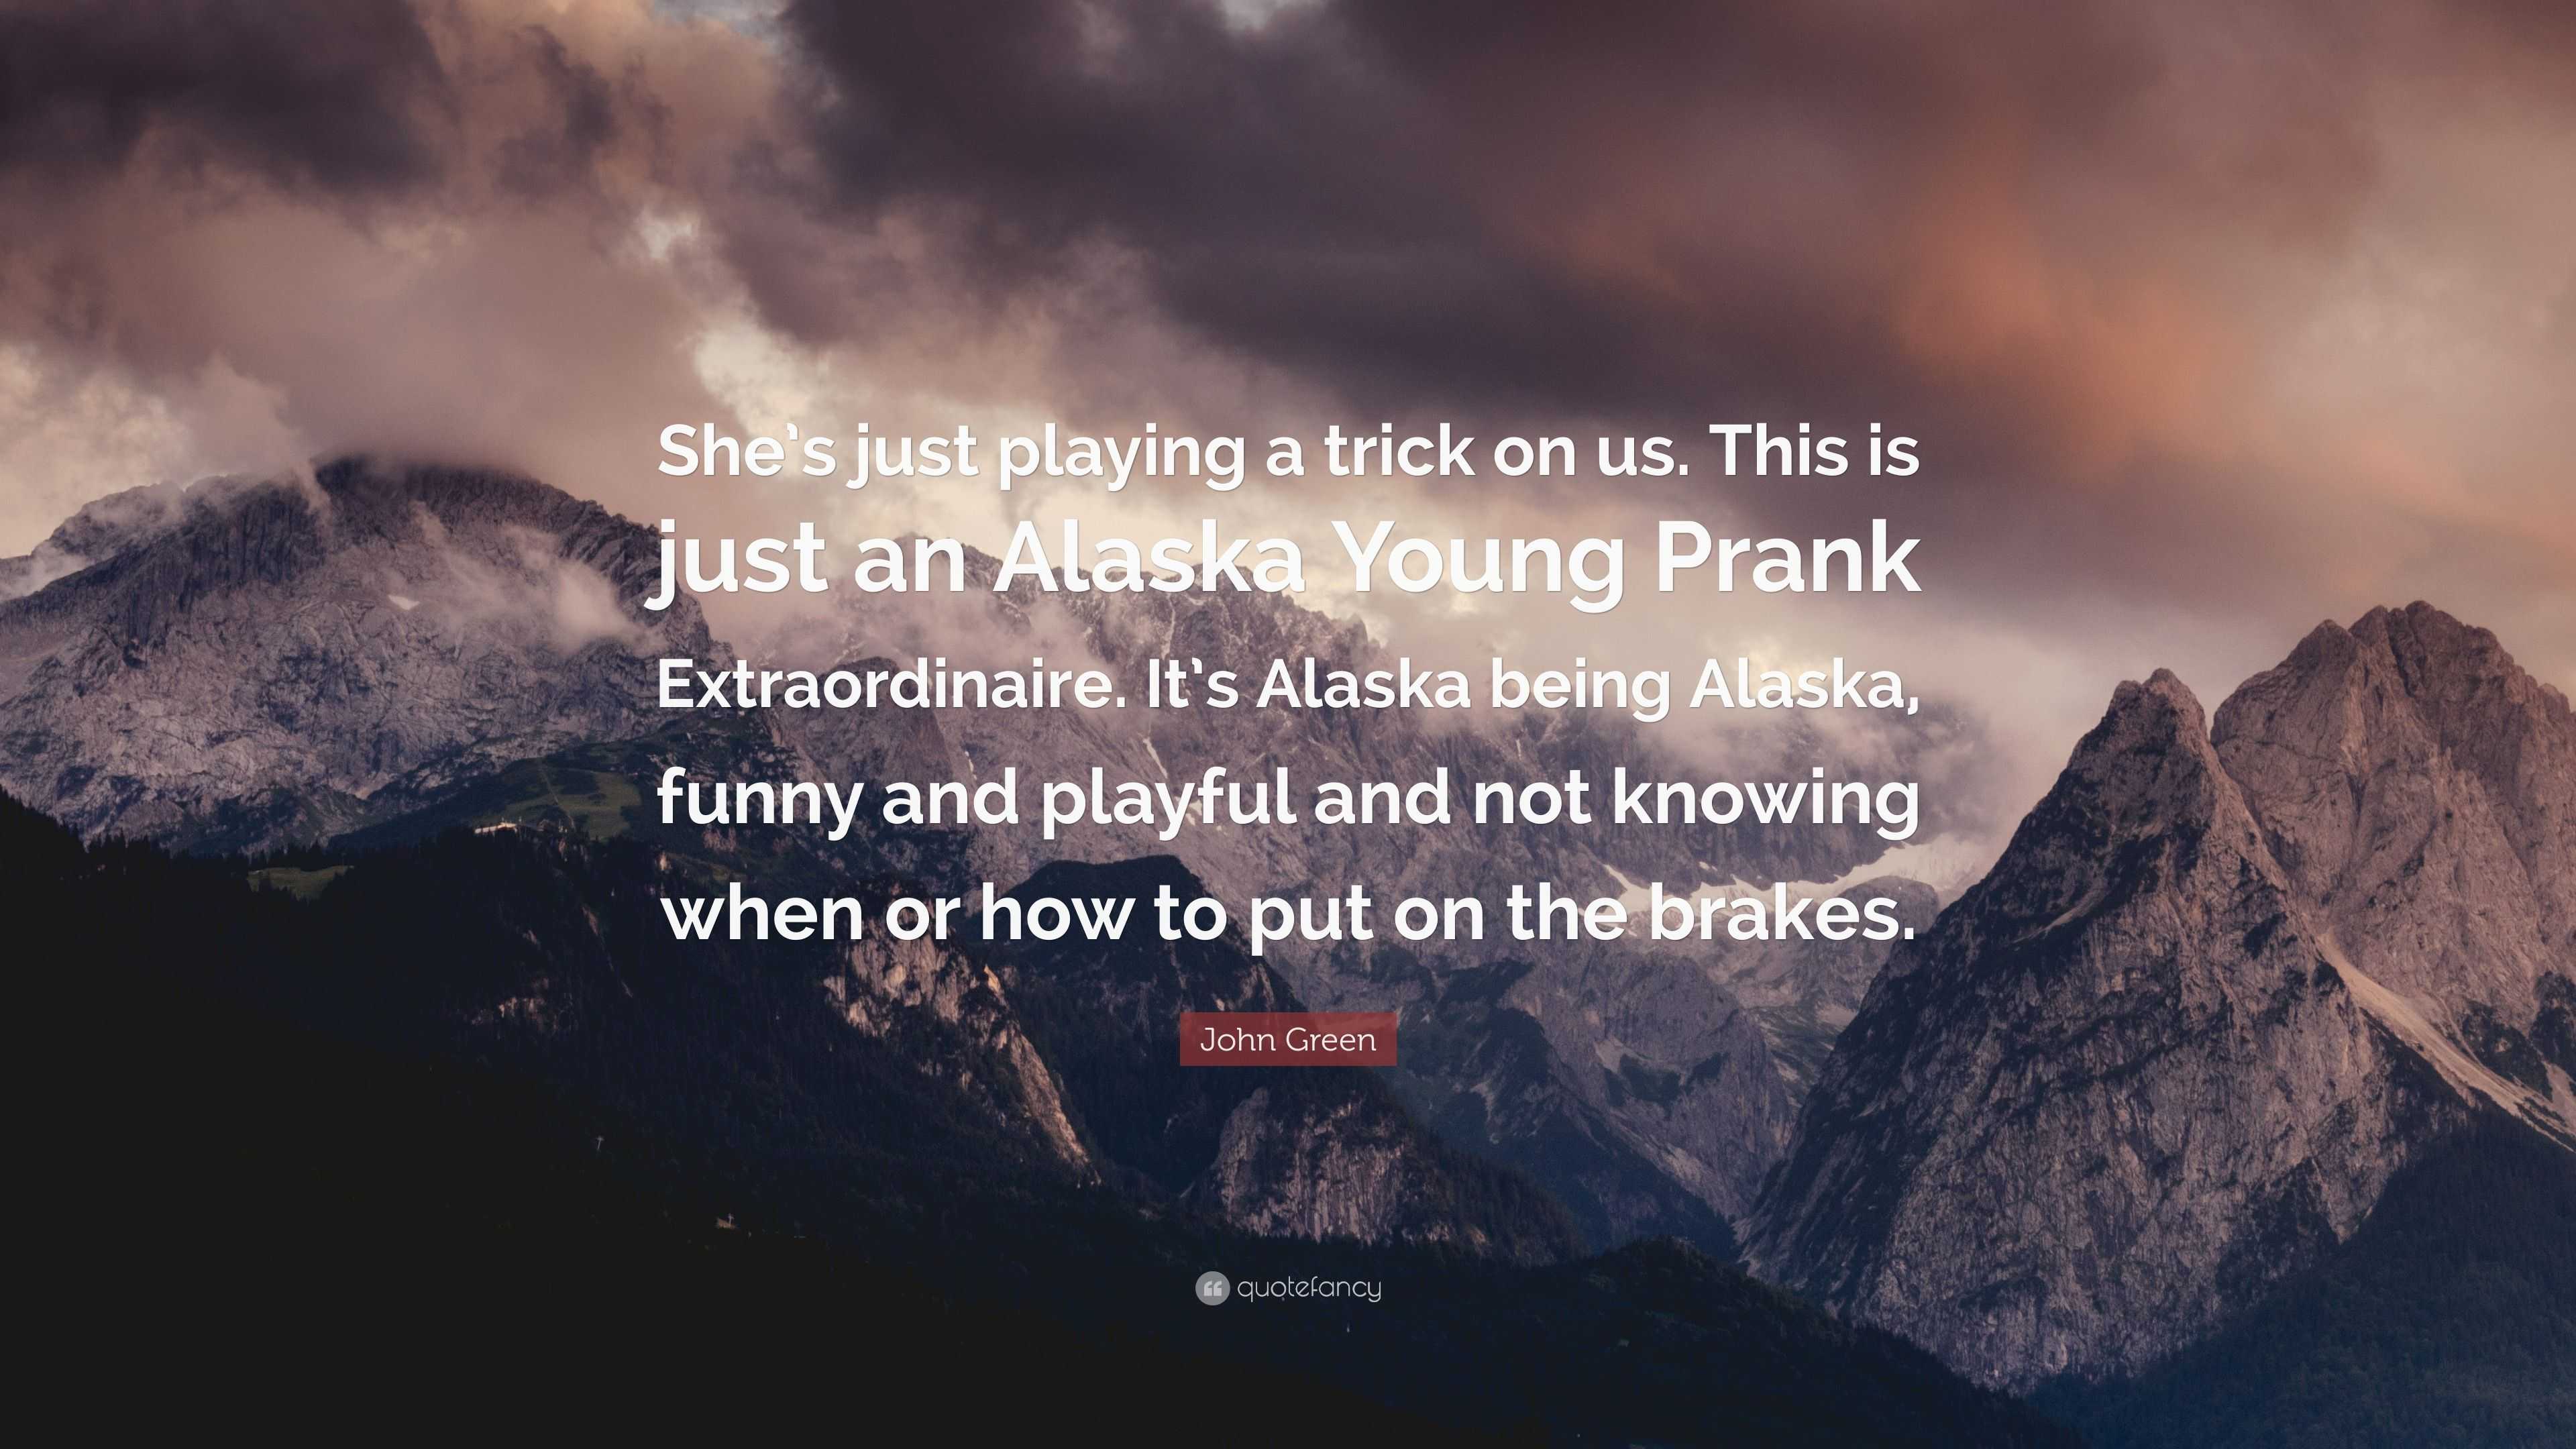 John Green Quote: “She's just playing a trick on us. This is just an Alaska  Young Prank Extraordinaire. It's Alaska being Alaska, funny and...”